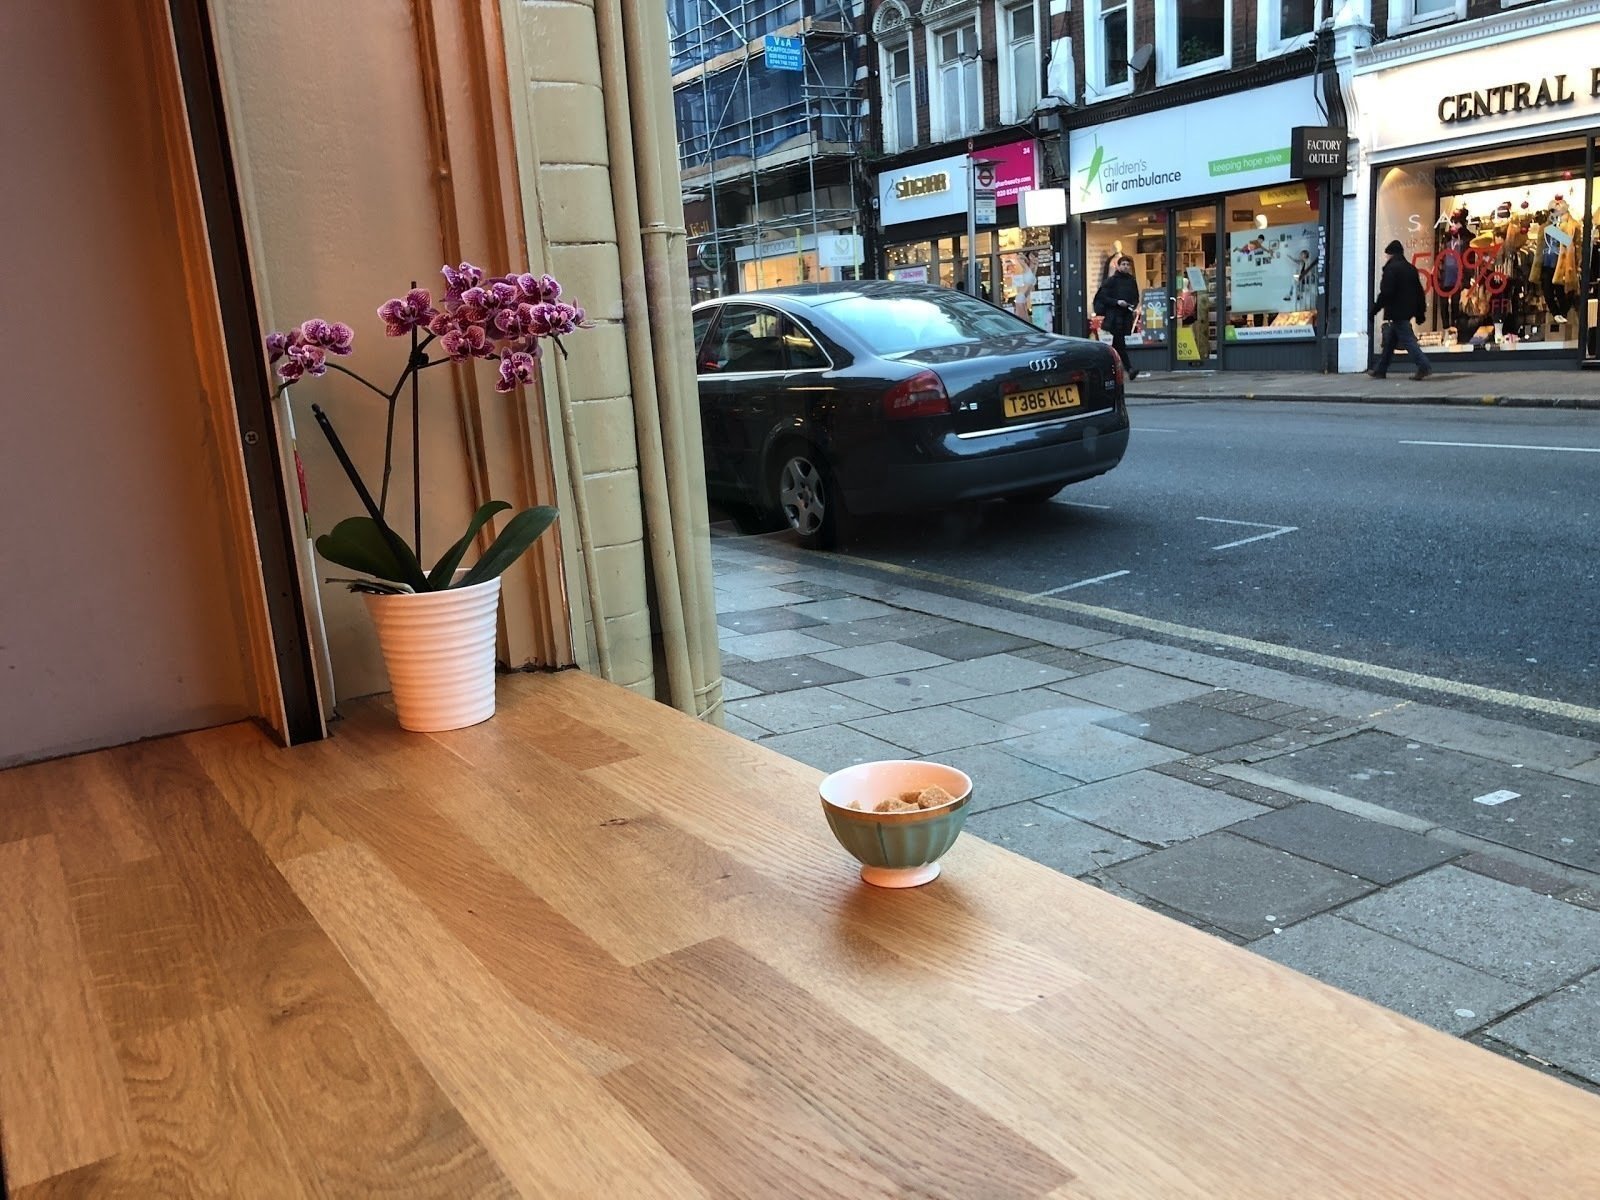 <span class="translation_missing" title="translation missing: en.meta.location_title, location_name: Armoni Coffee, city: London">Location Title</span>